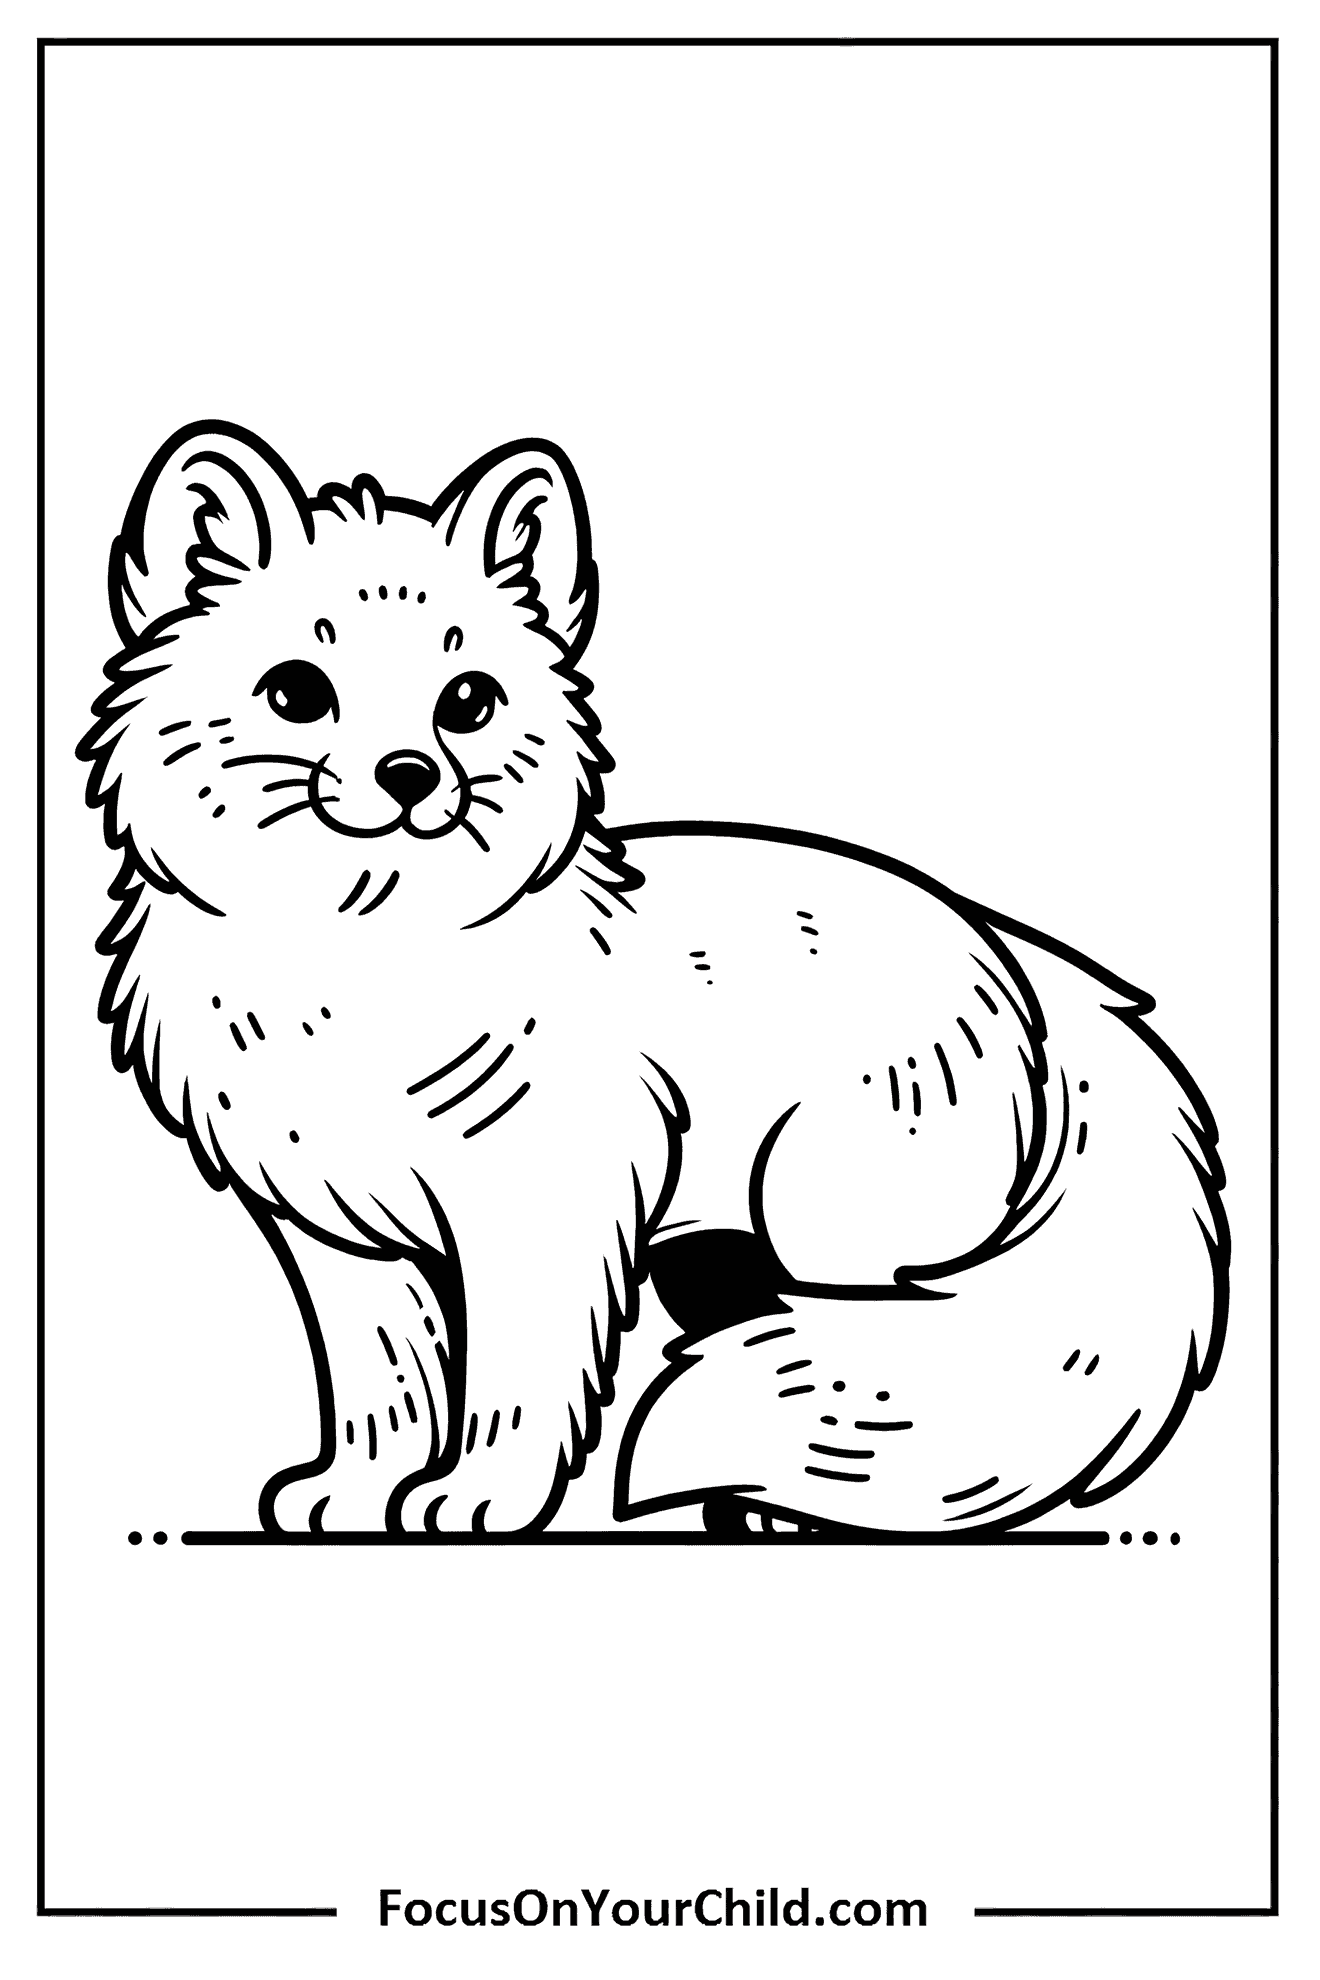 Arctic fox line drawing, fluffy and adorable, perfect for childrens educational content.